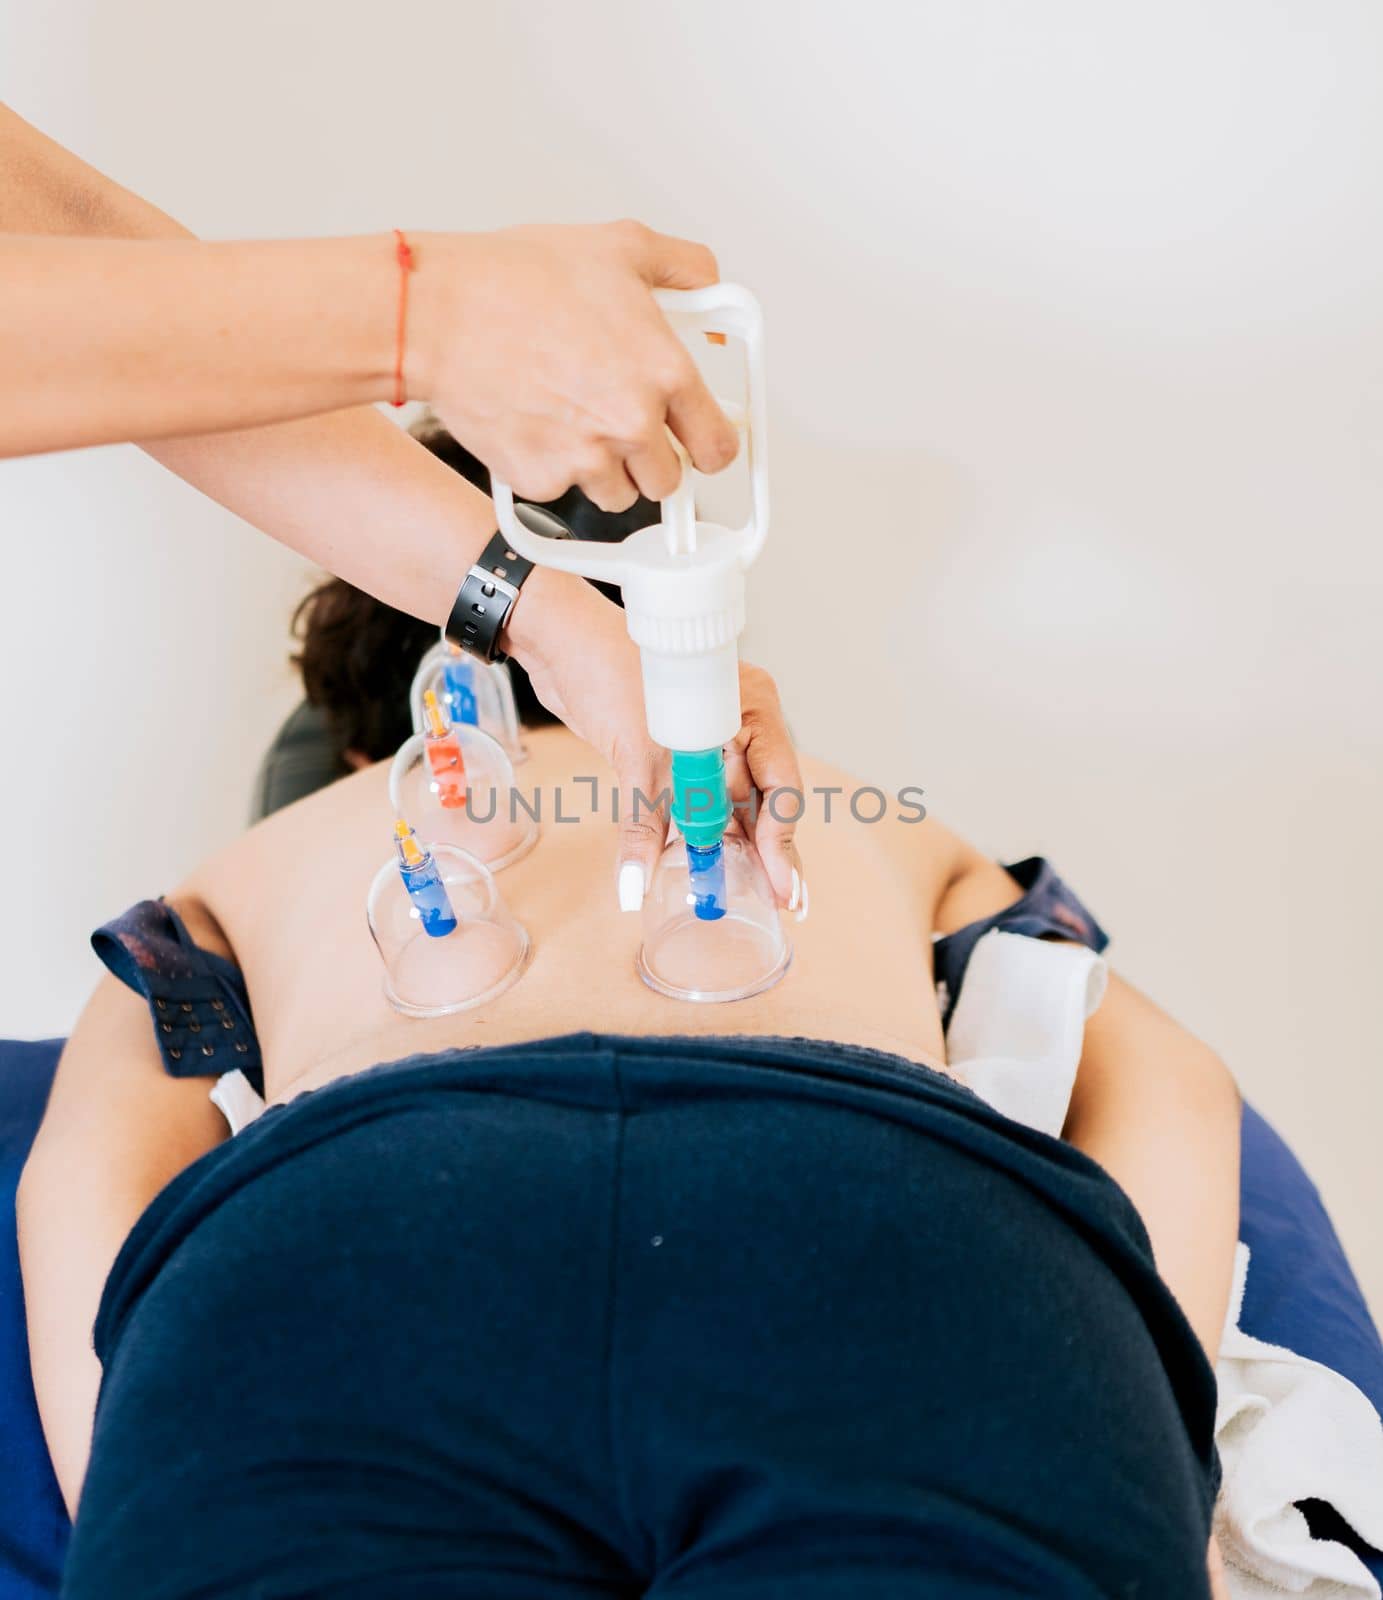 Physiotherapist placing cupping on patient, Physiotherapist placing cupping on lying patient. Modern physiotherapy with cupping, Hands of physiotherapist placing cupping on patient by isaiphoto